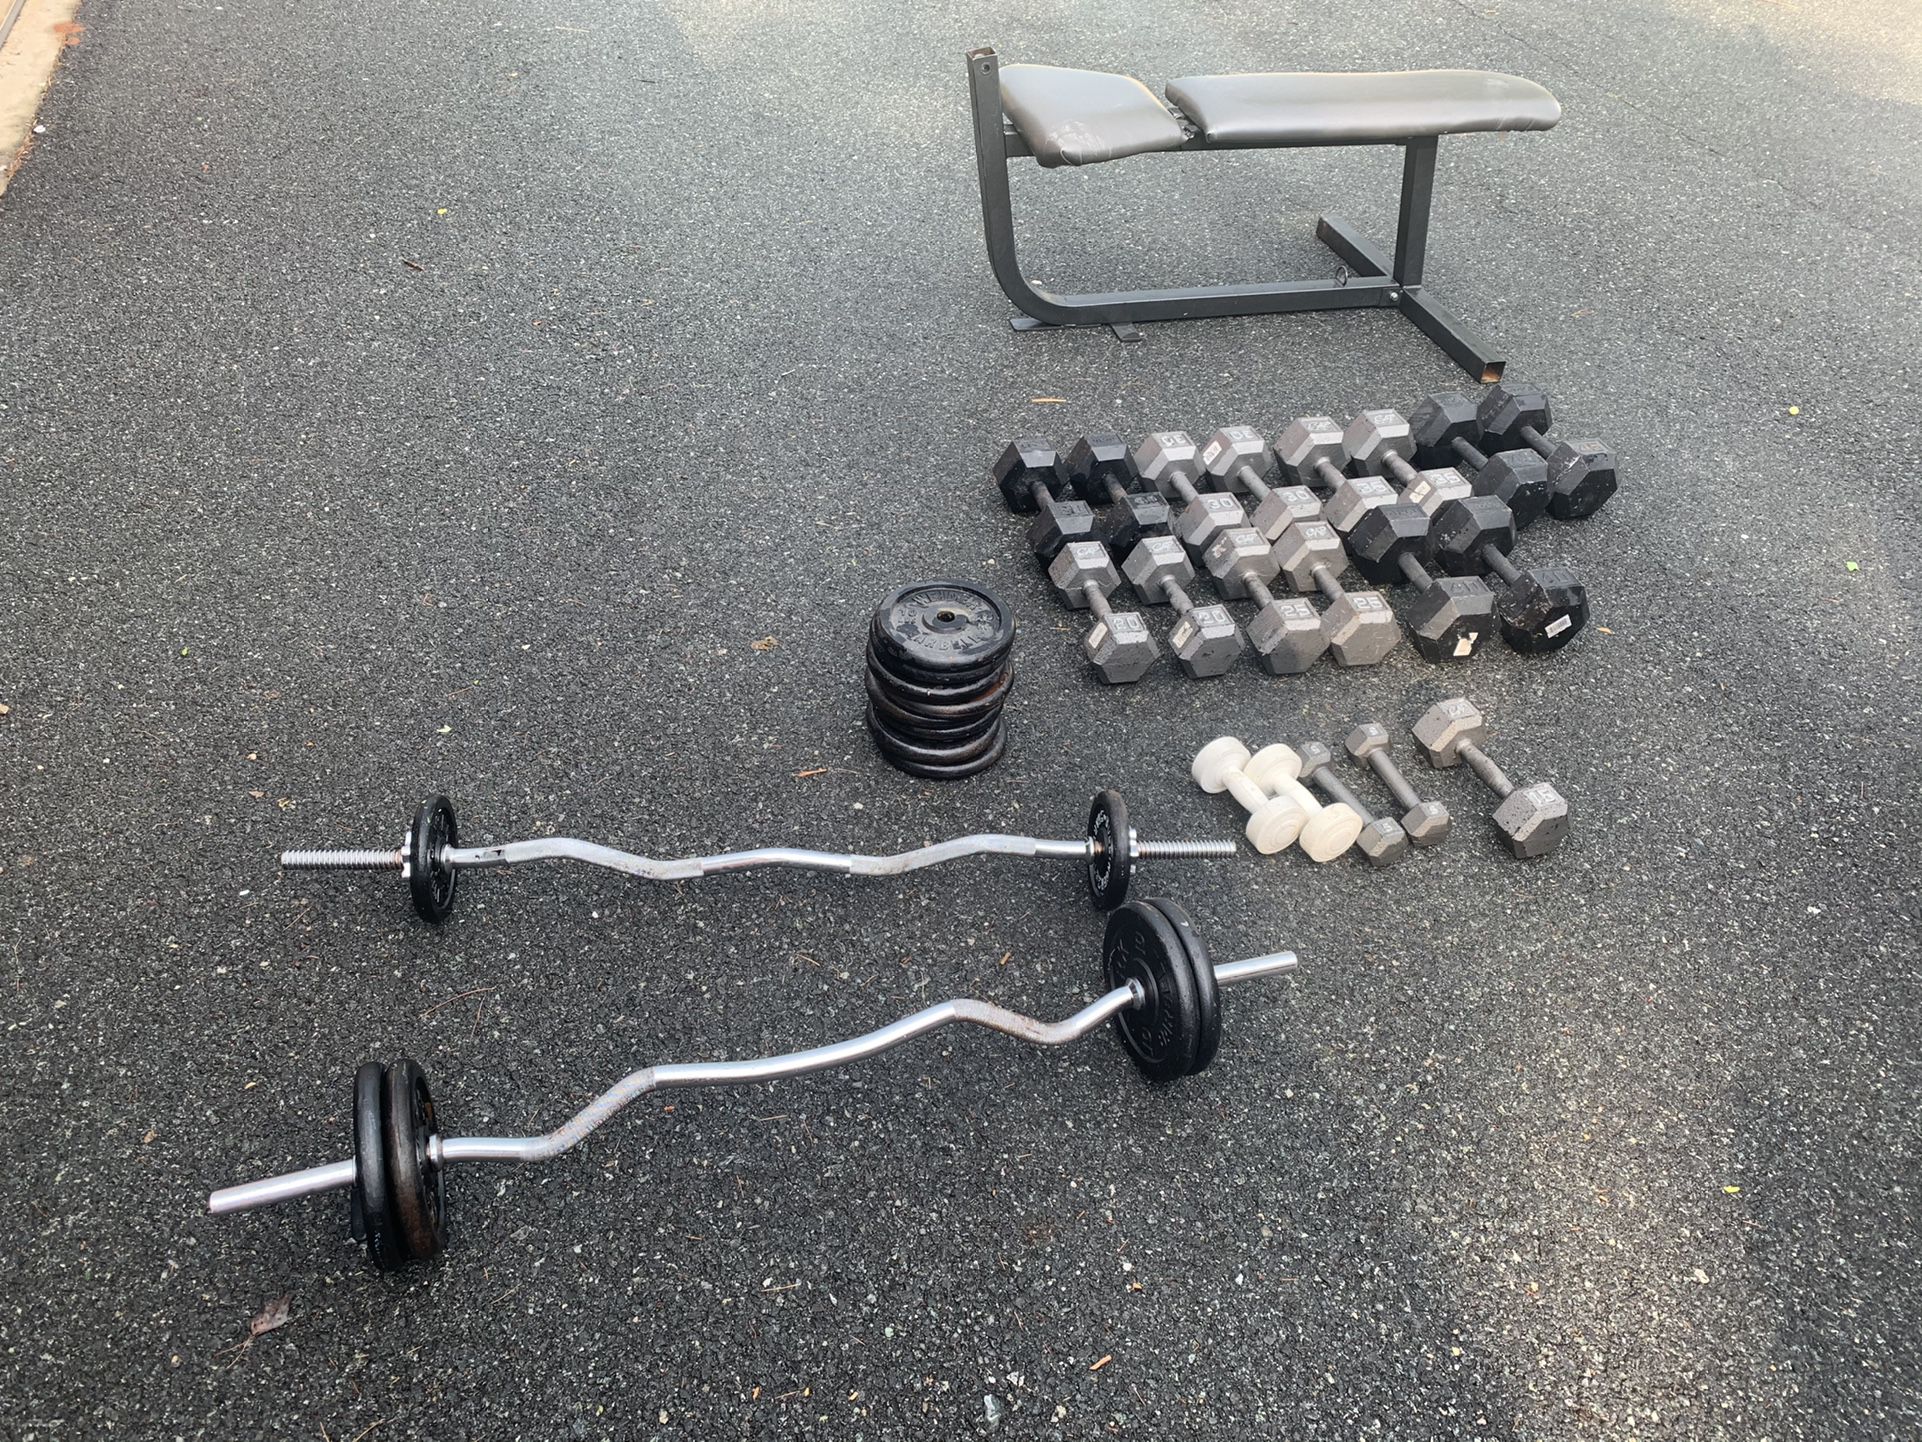 Complete workout set bench, dumbbells, plates and bars over 600lbs